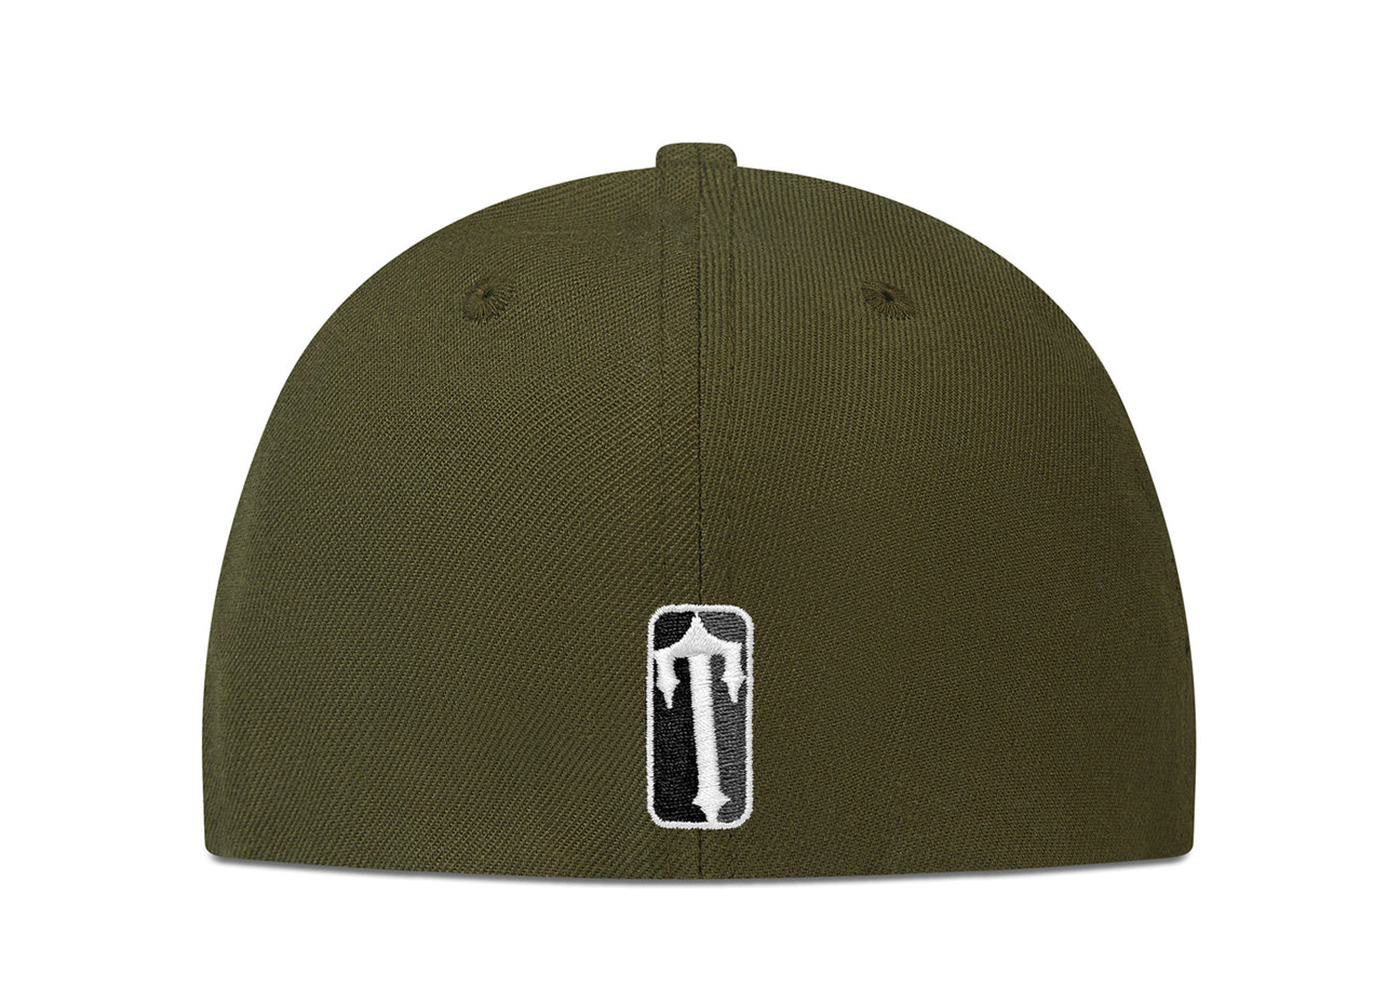 Trapstar IT'S A SECRET FITTED - OLIVE